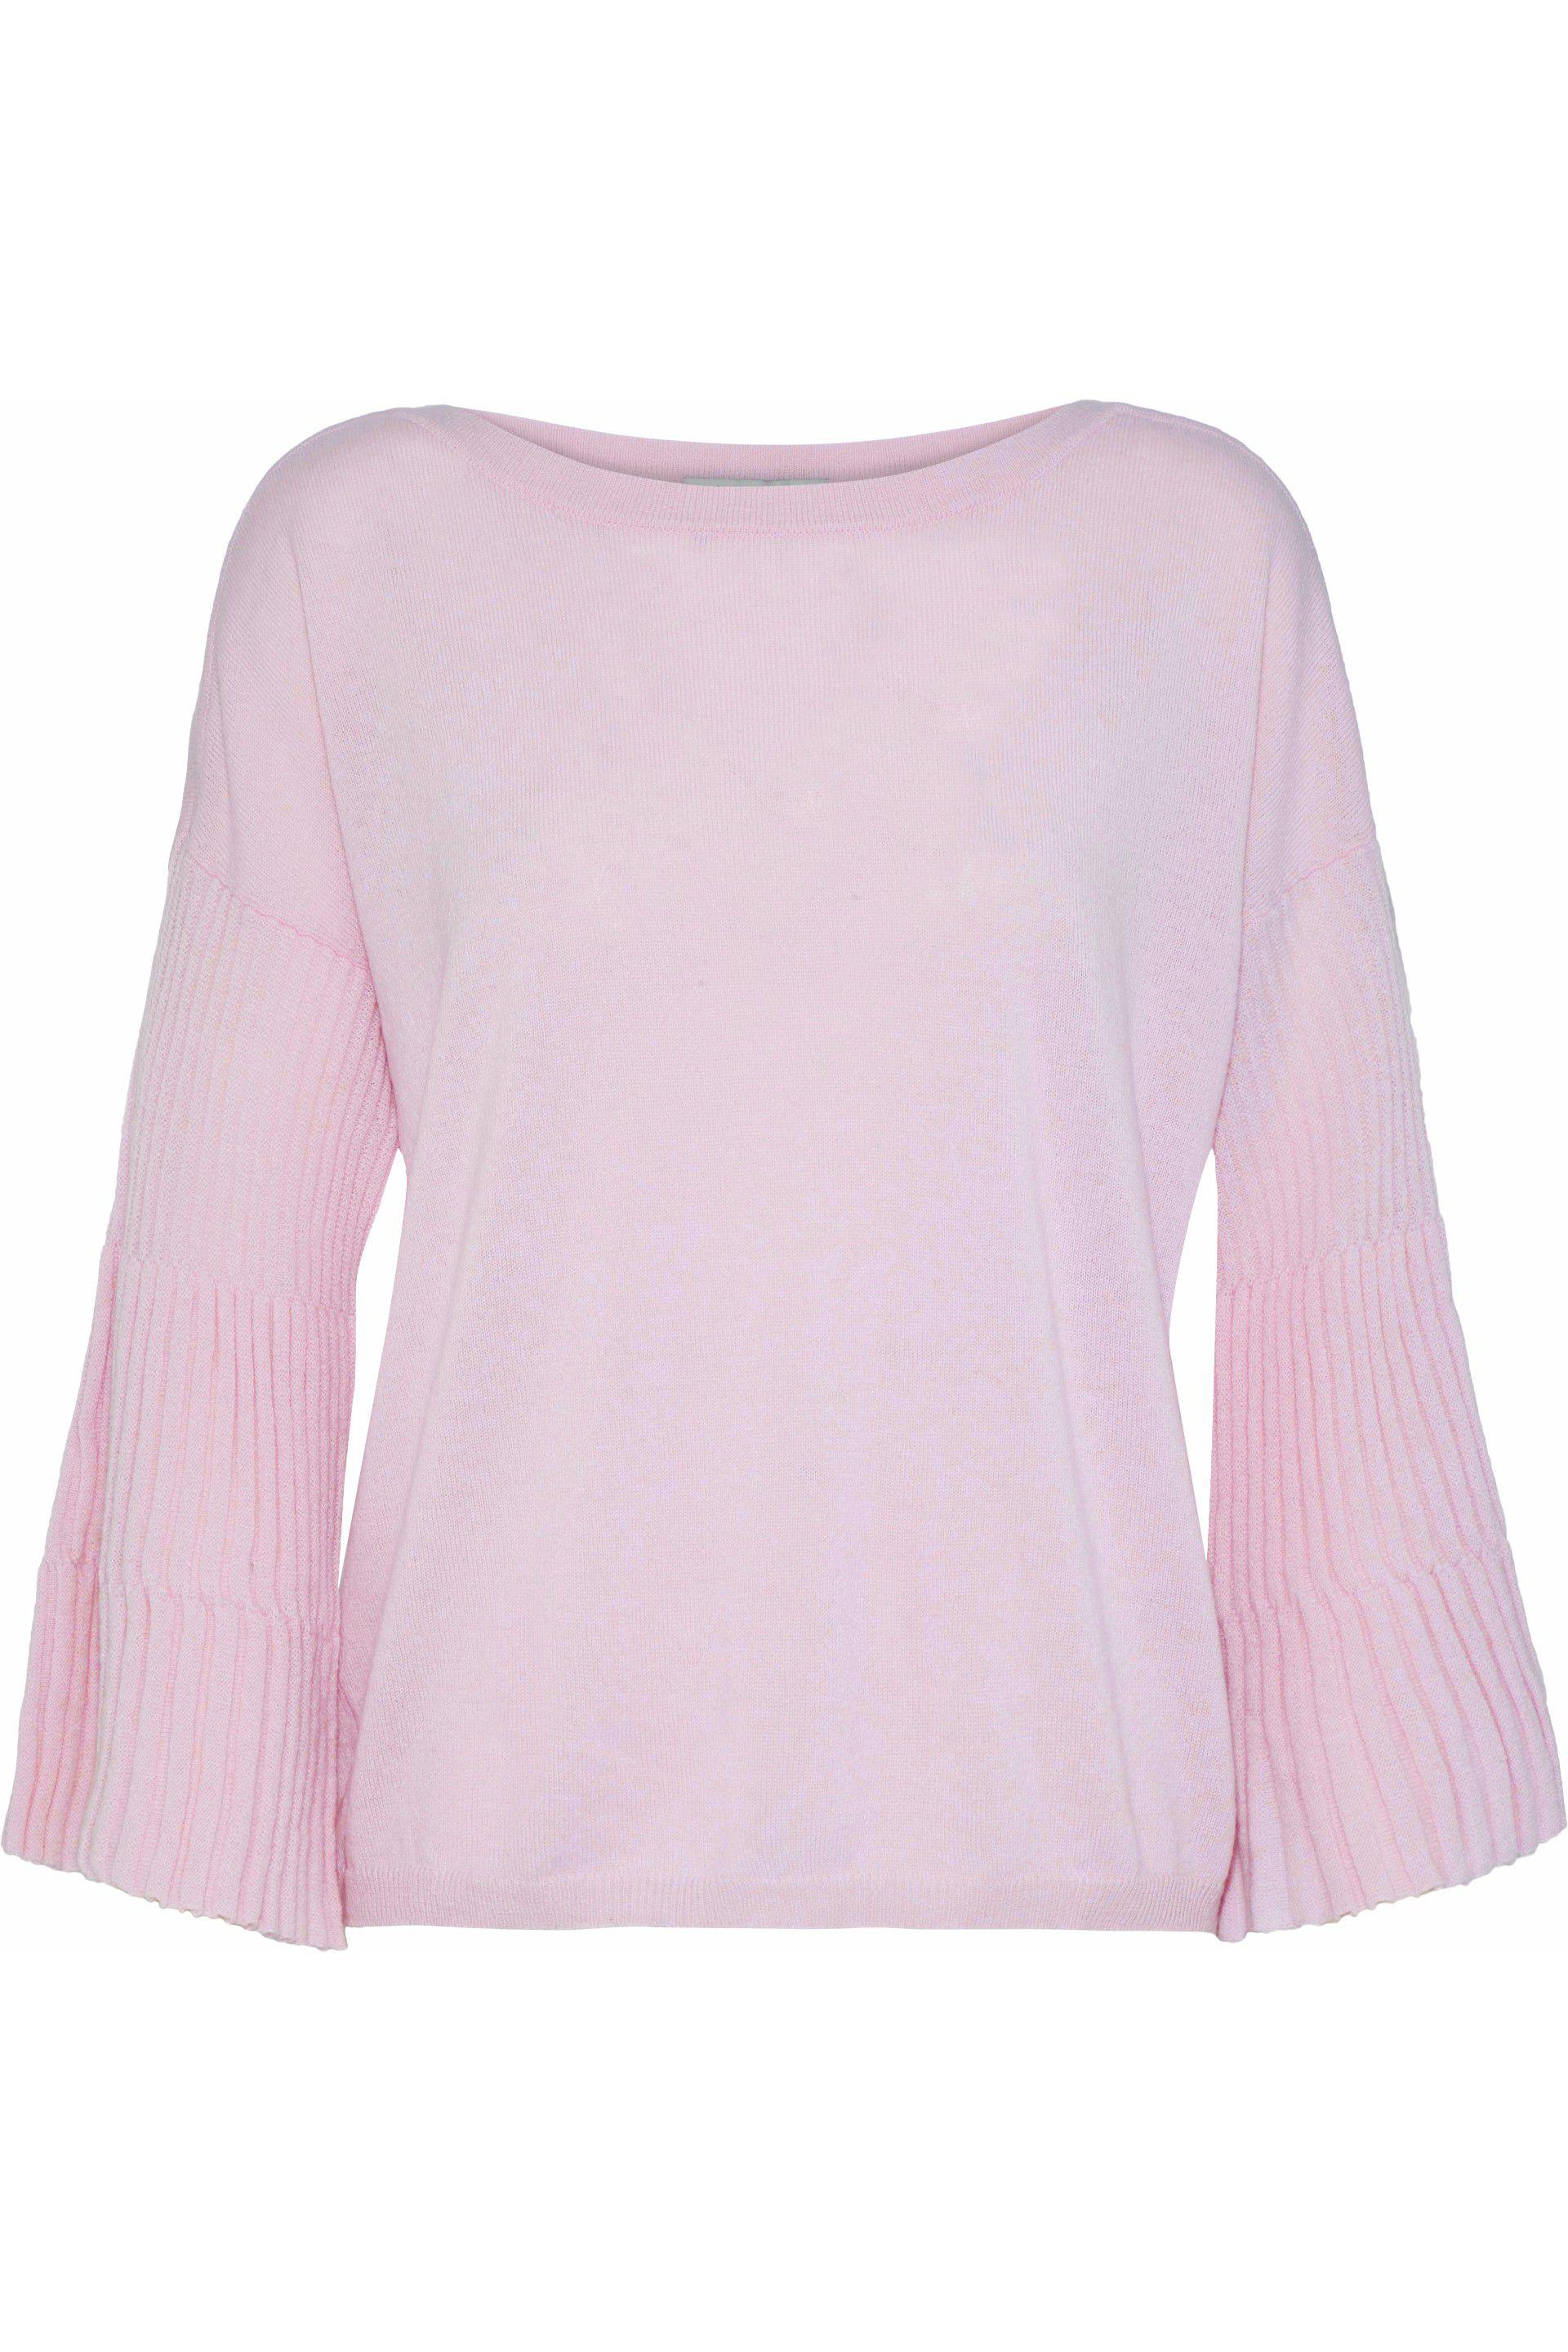 Lyst - Autumn Cashmere Fluted Cashmere Sweater in Pink